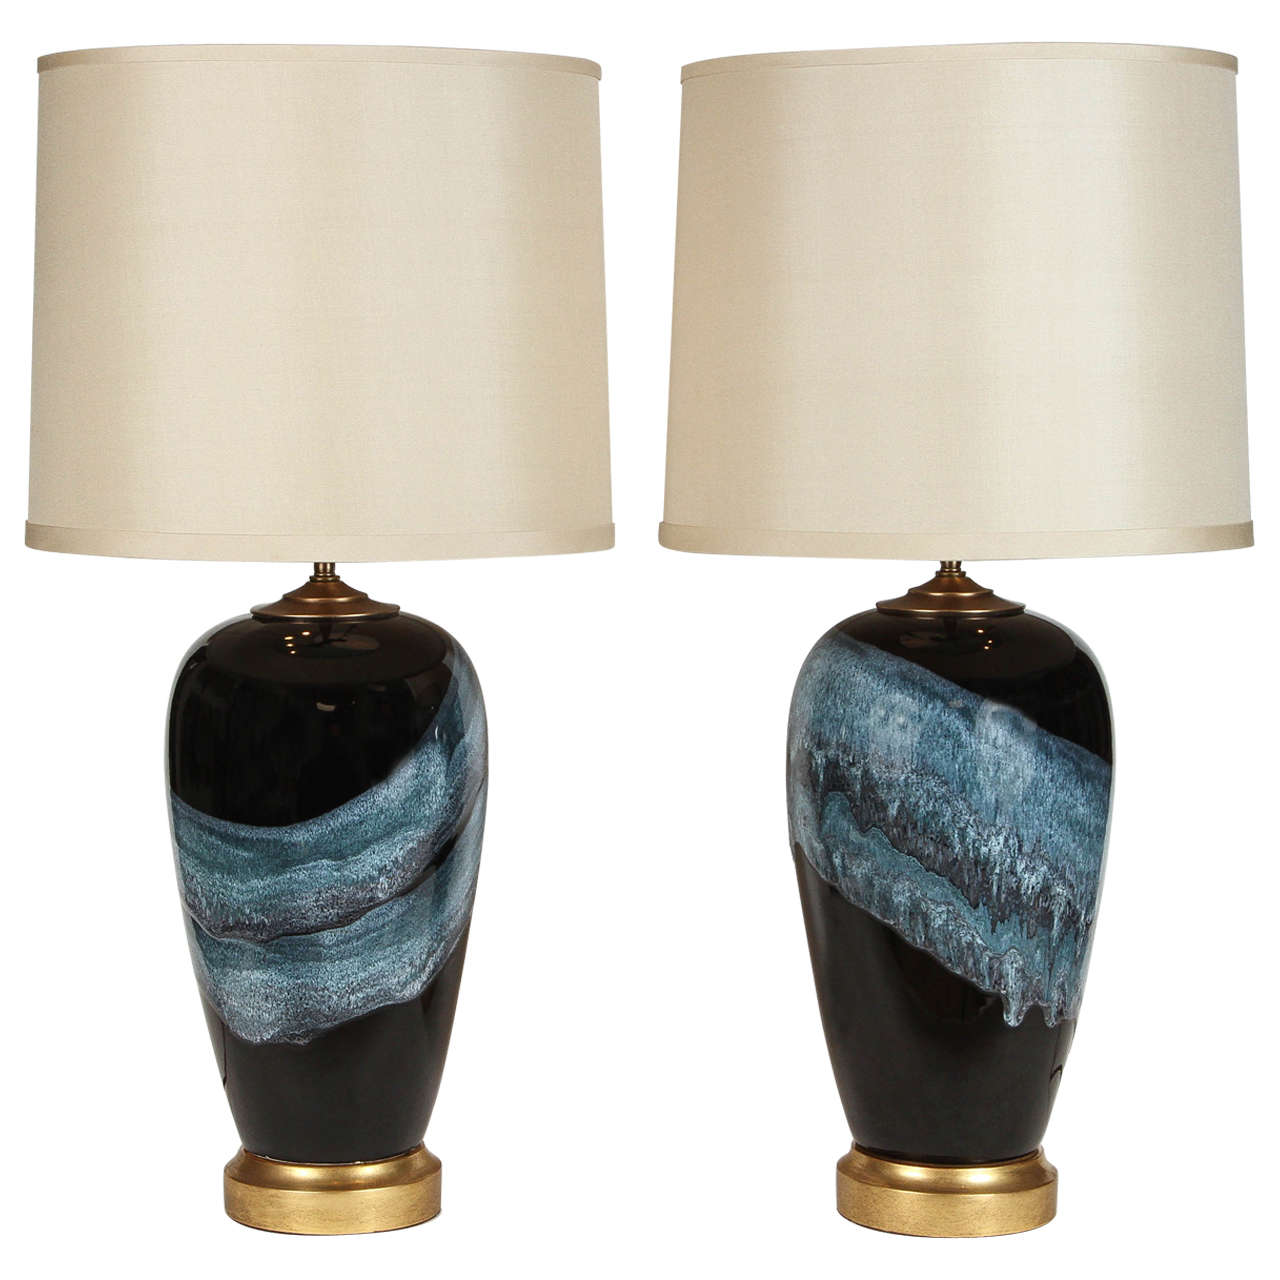 Pair of Drip Glazed Lamps